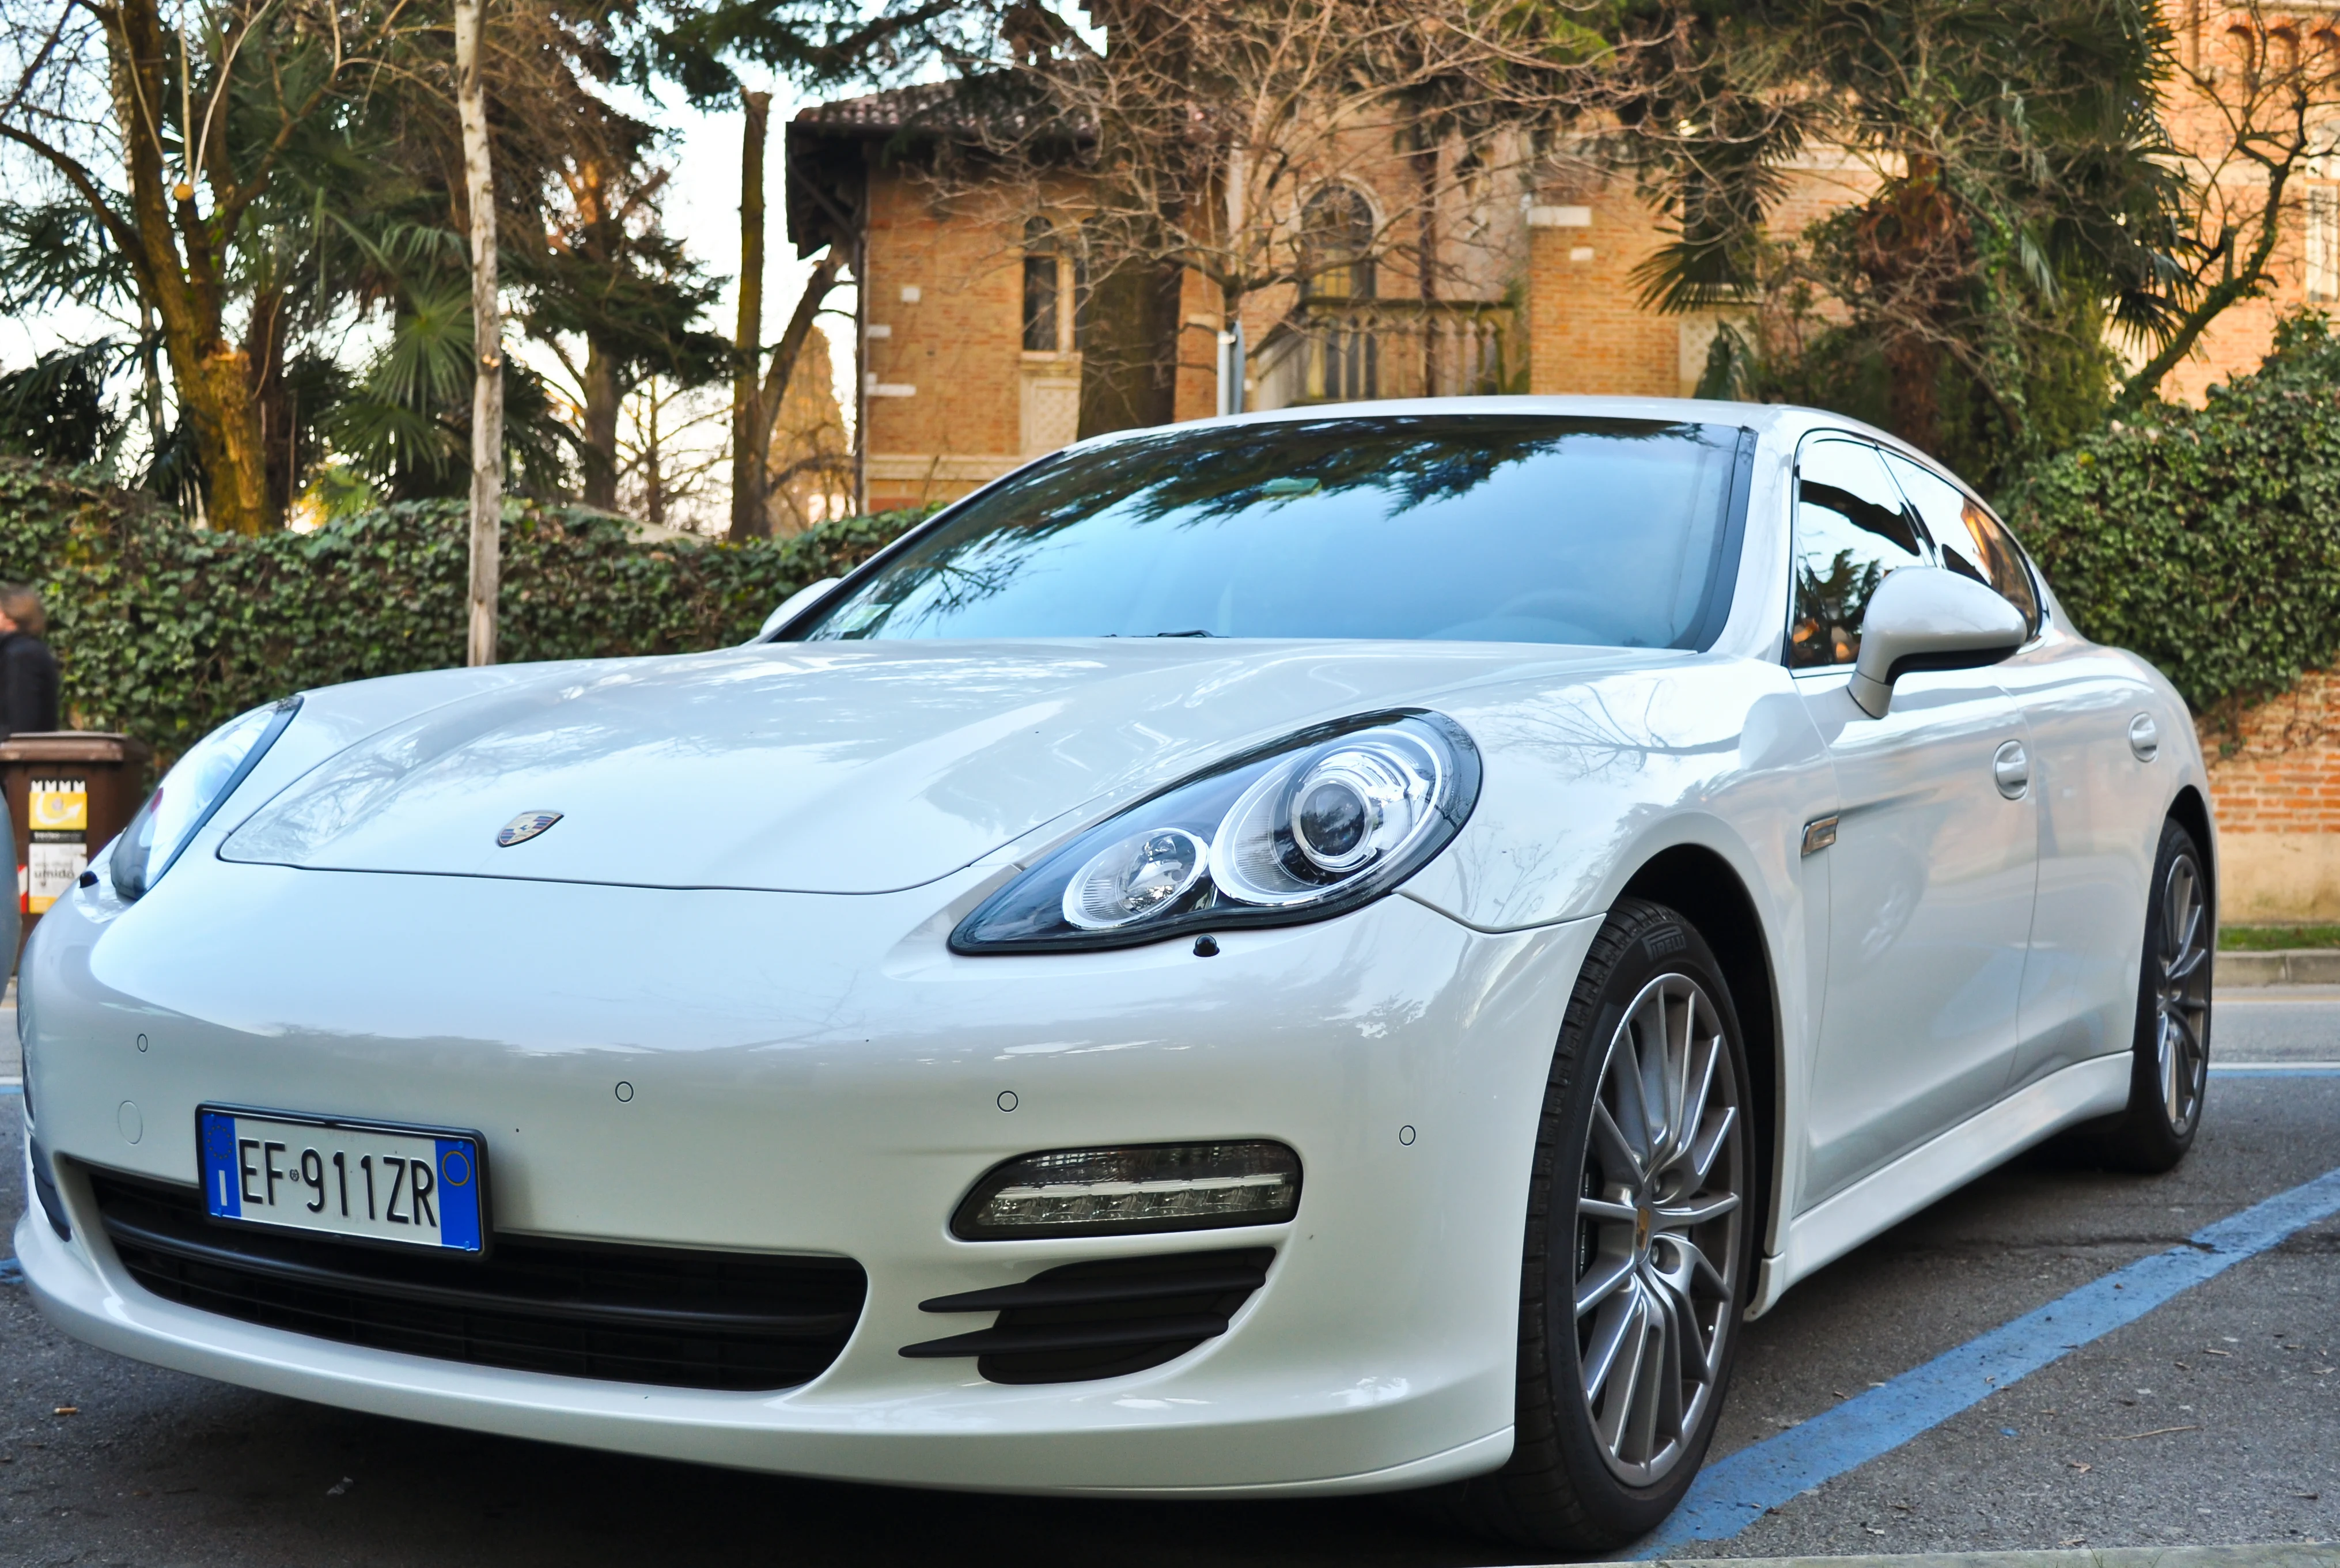 Porsche Boxster parked i front of a house in Treviso,Itally